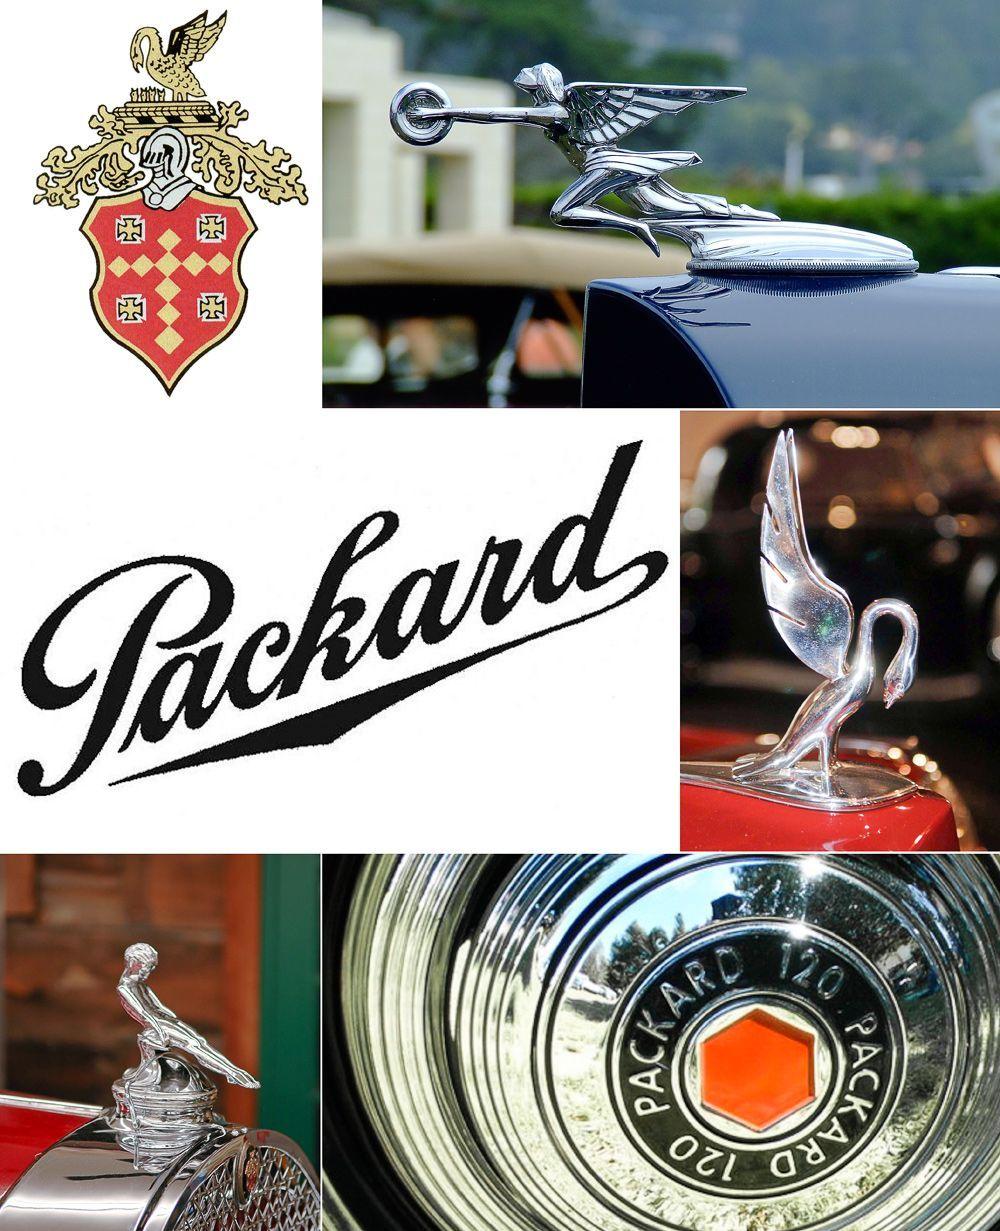 Packard Logo - Packard logos...they stayed the same thruout the years...the oxbow ...